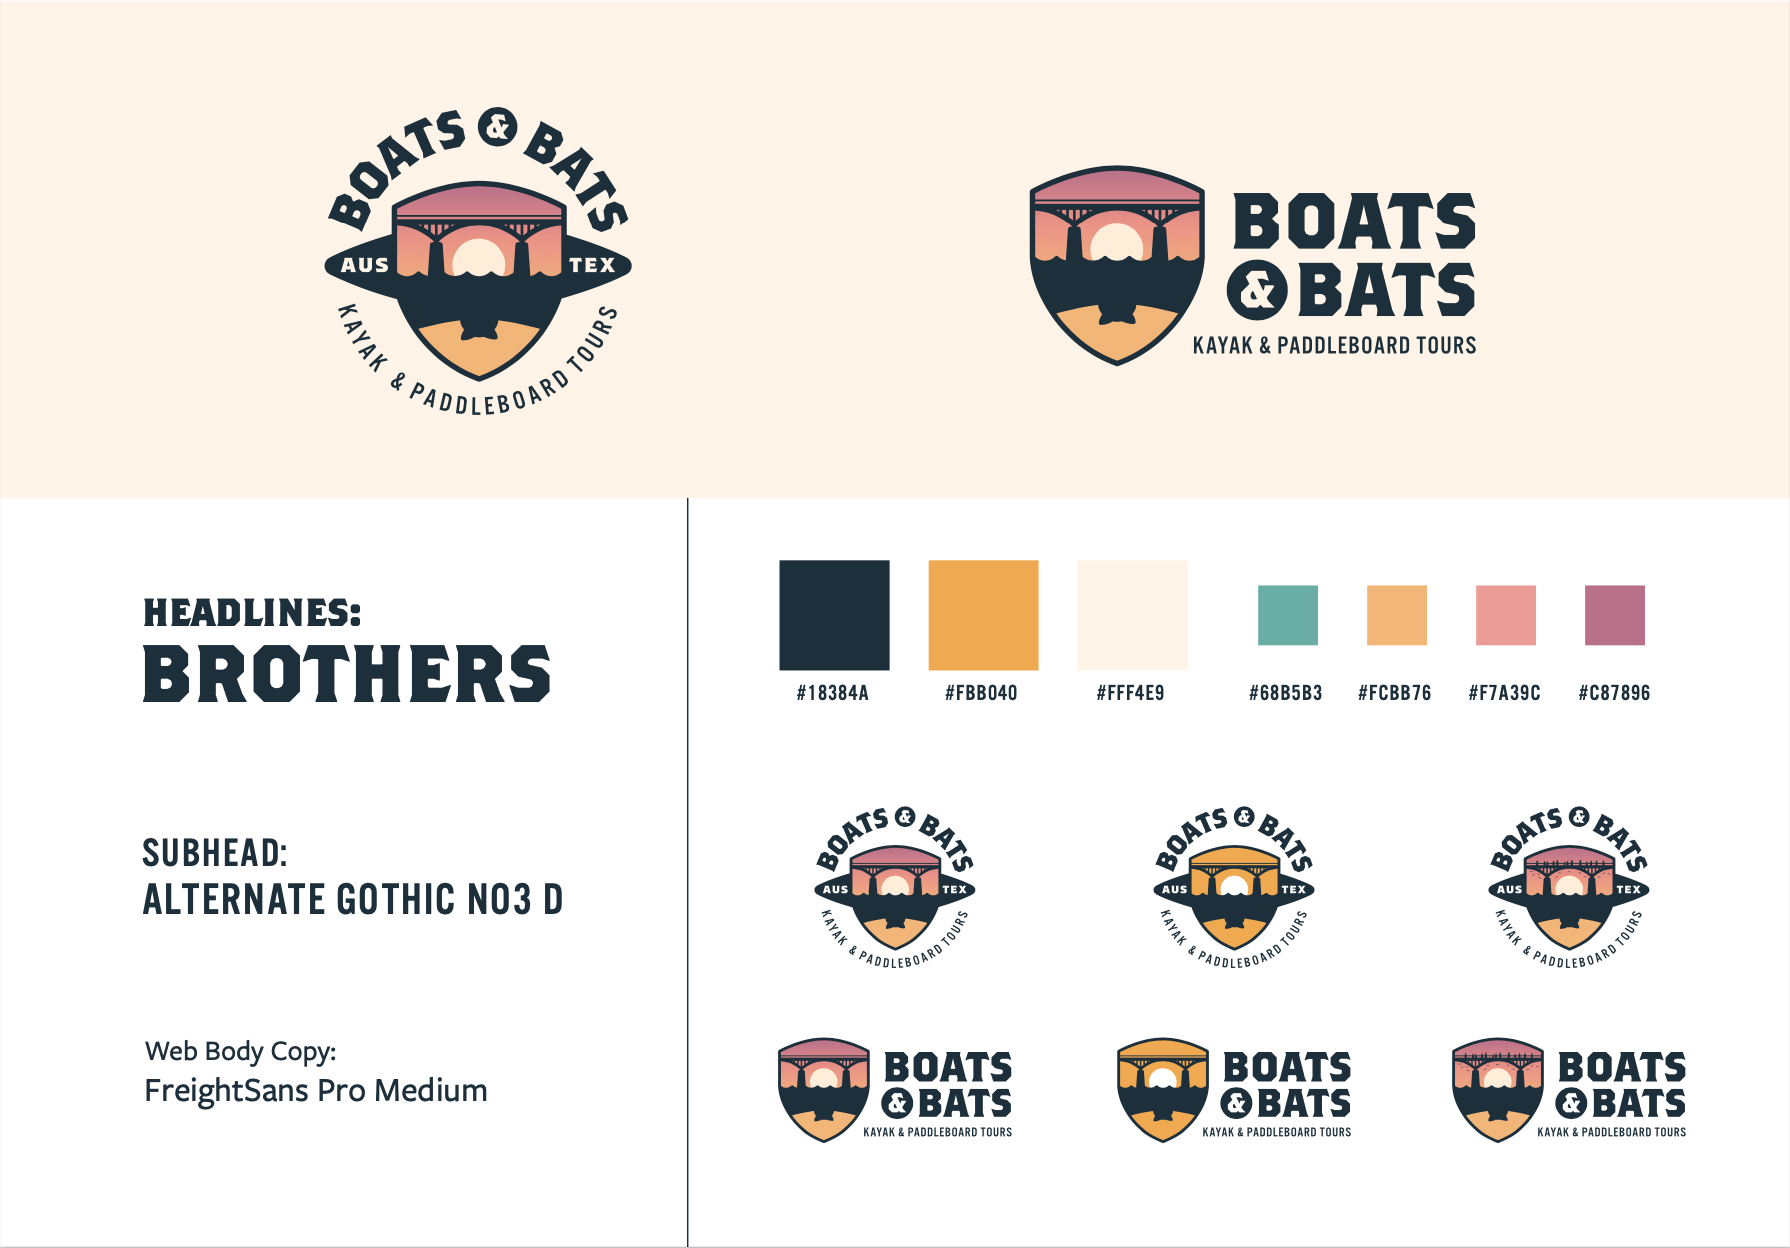 Brand Guide For Boats & Bats